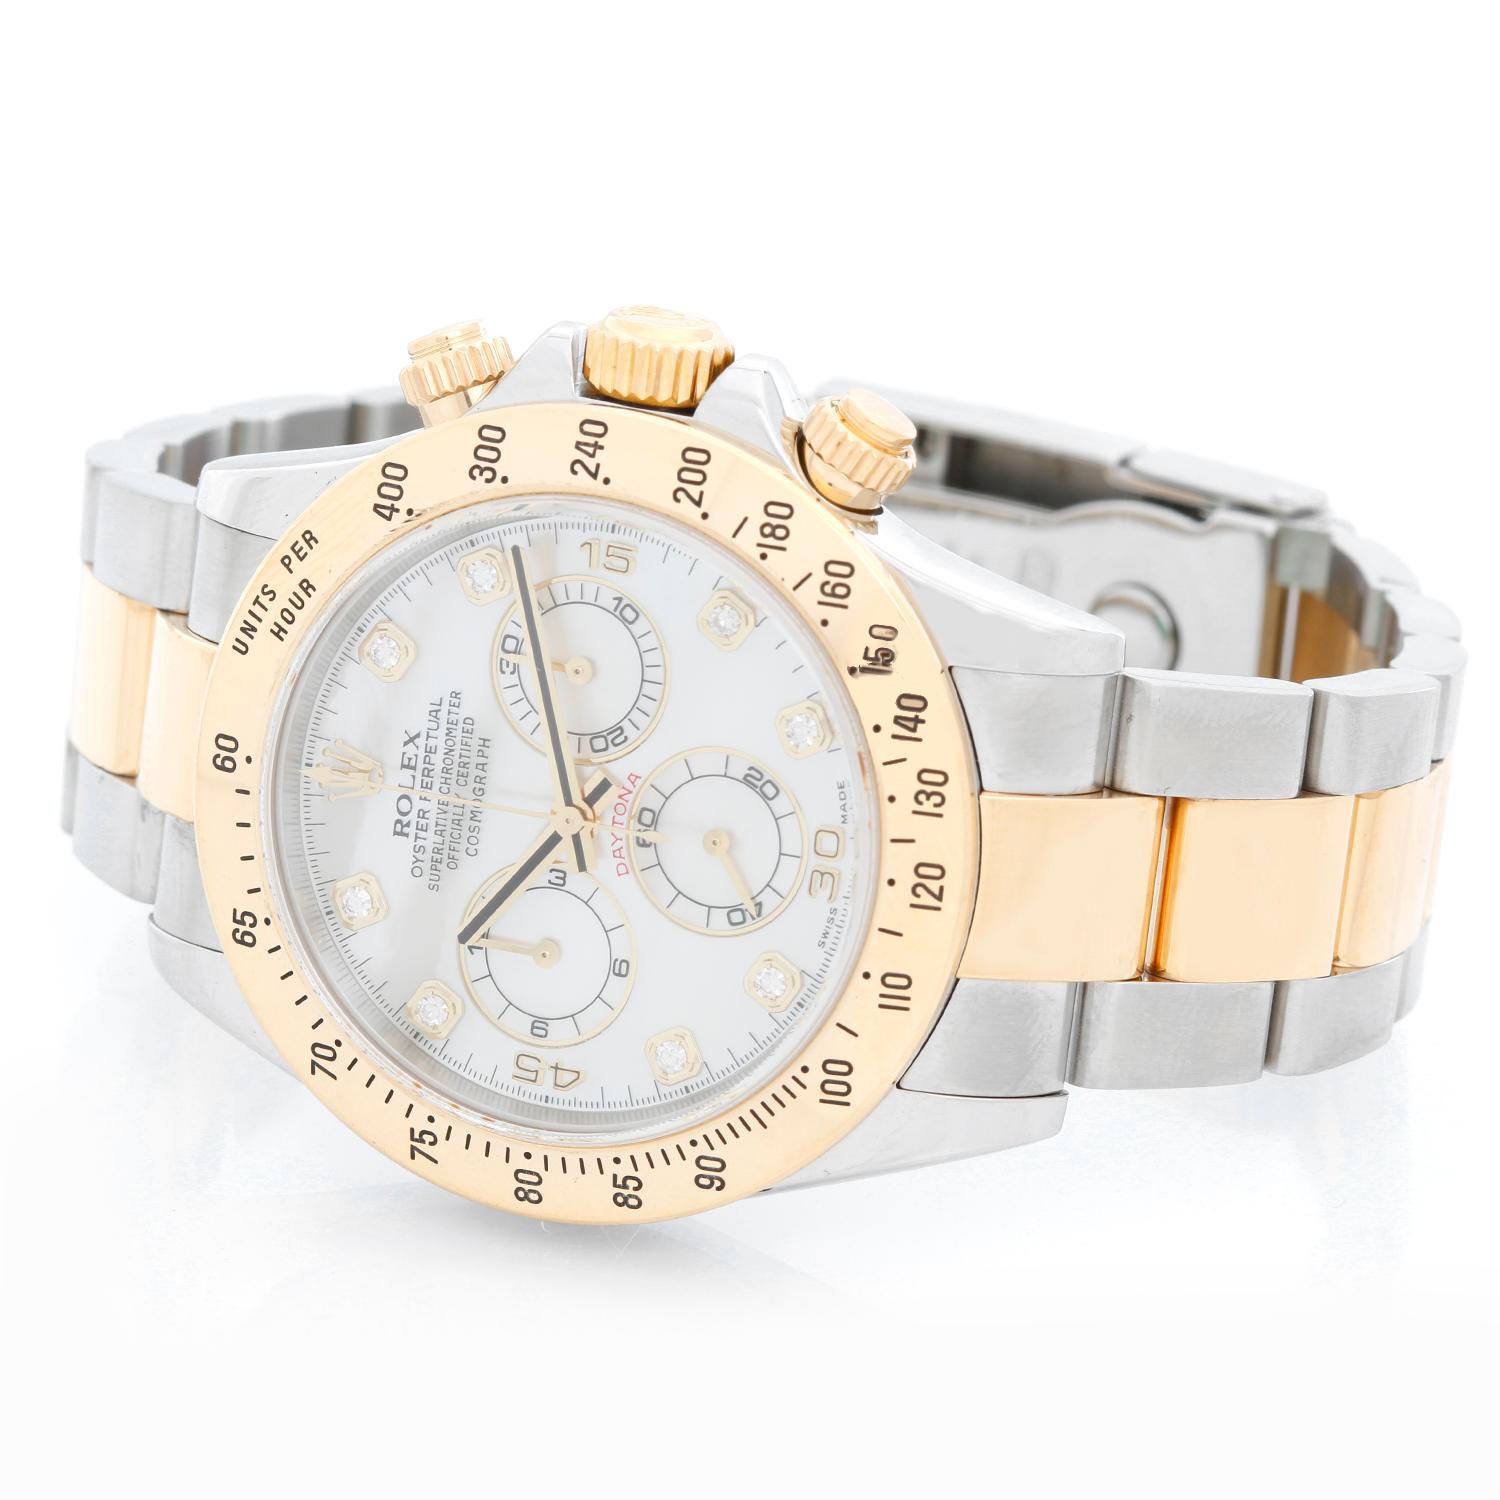 Rolex Cosmograph Daytona Men's Watch 116523 - Automatic winding, chronograph, 44 jewels, sapphire crystal. Stainless steel case with 18k yellow gold bezel ( 40 mm ). Rolex White Mother of Pearl with Diamonds . Stainless steel and 18k yellow gold